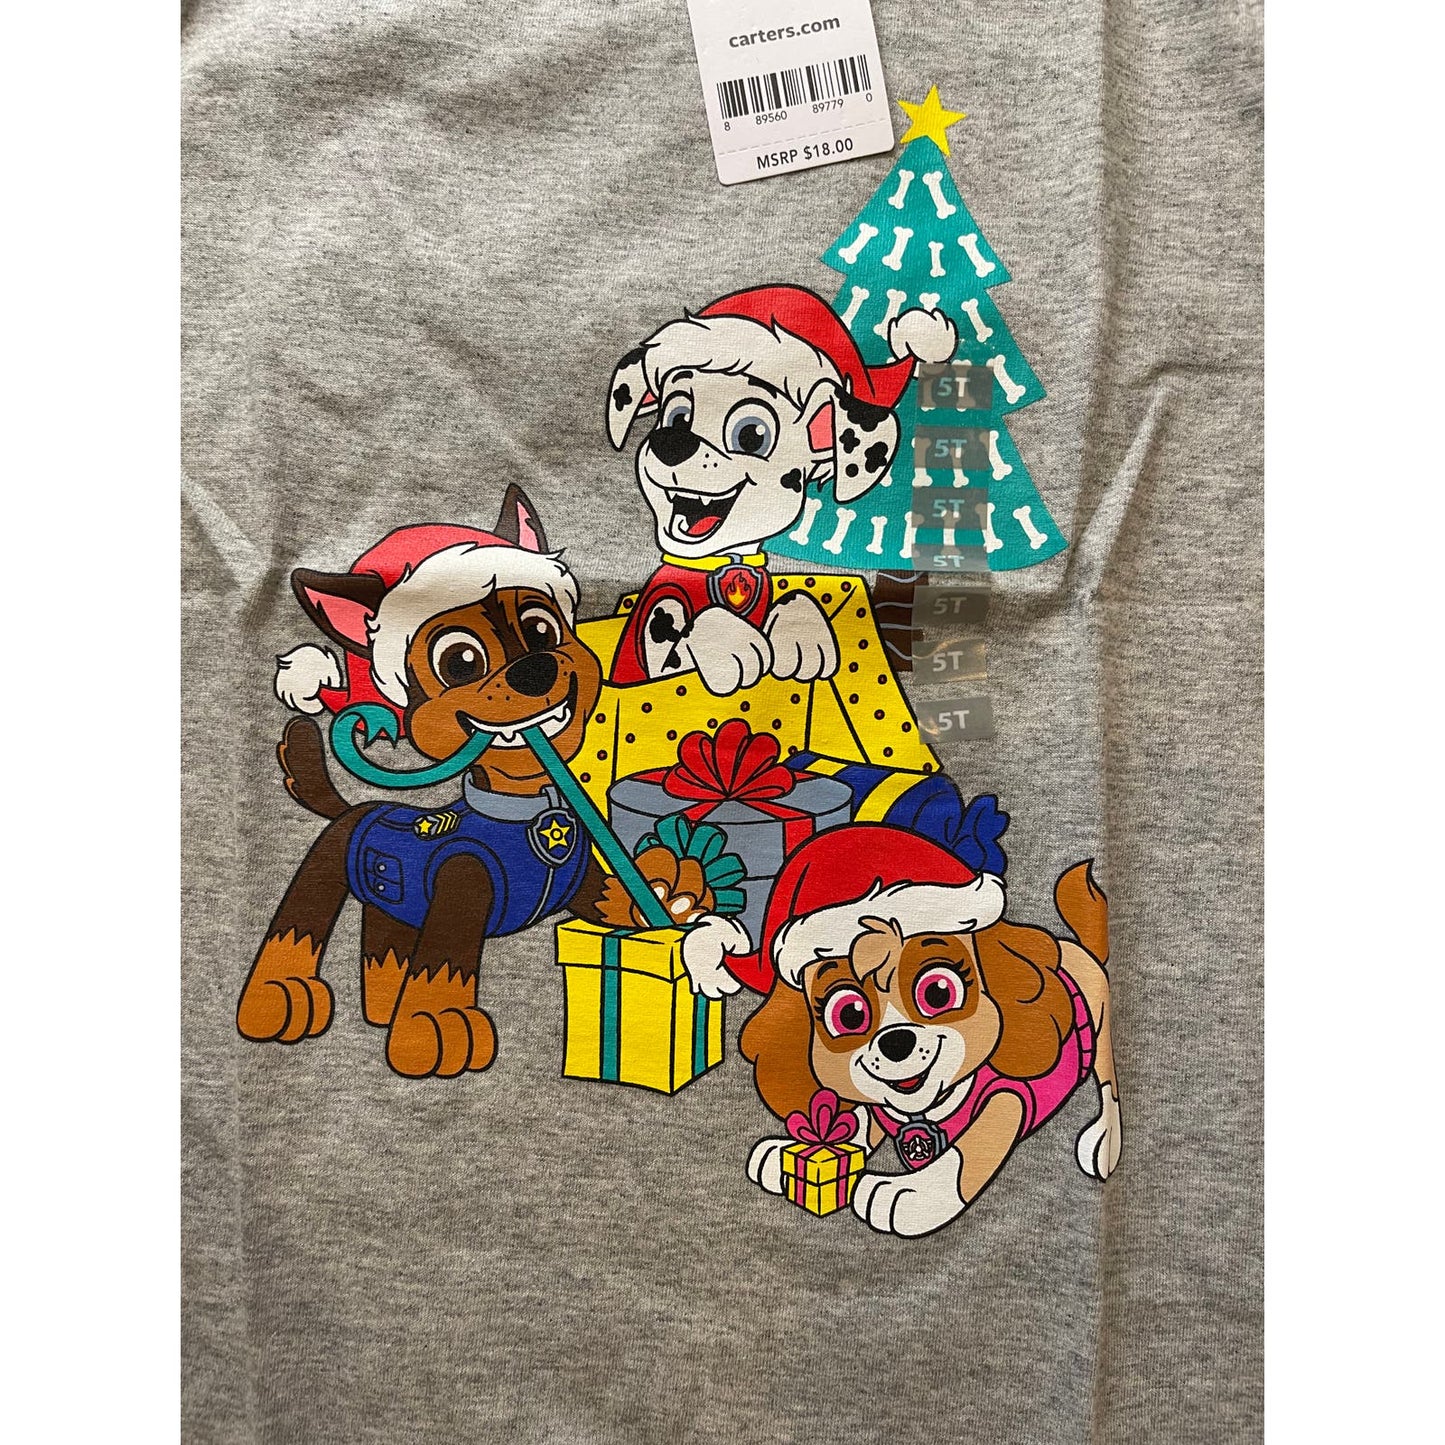 NWT Carters Size 5T Children's Paw Patrol Holiday Christmas Long Sleeve Shirt